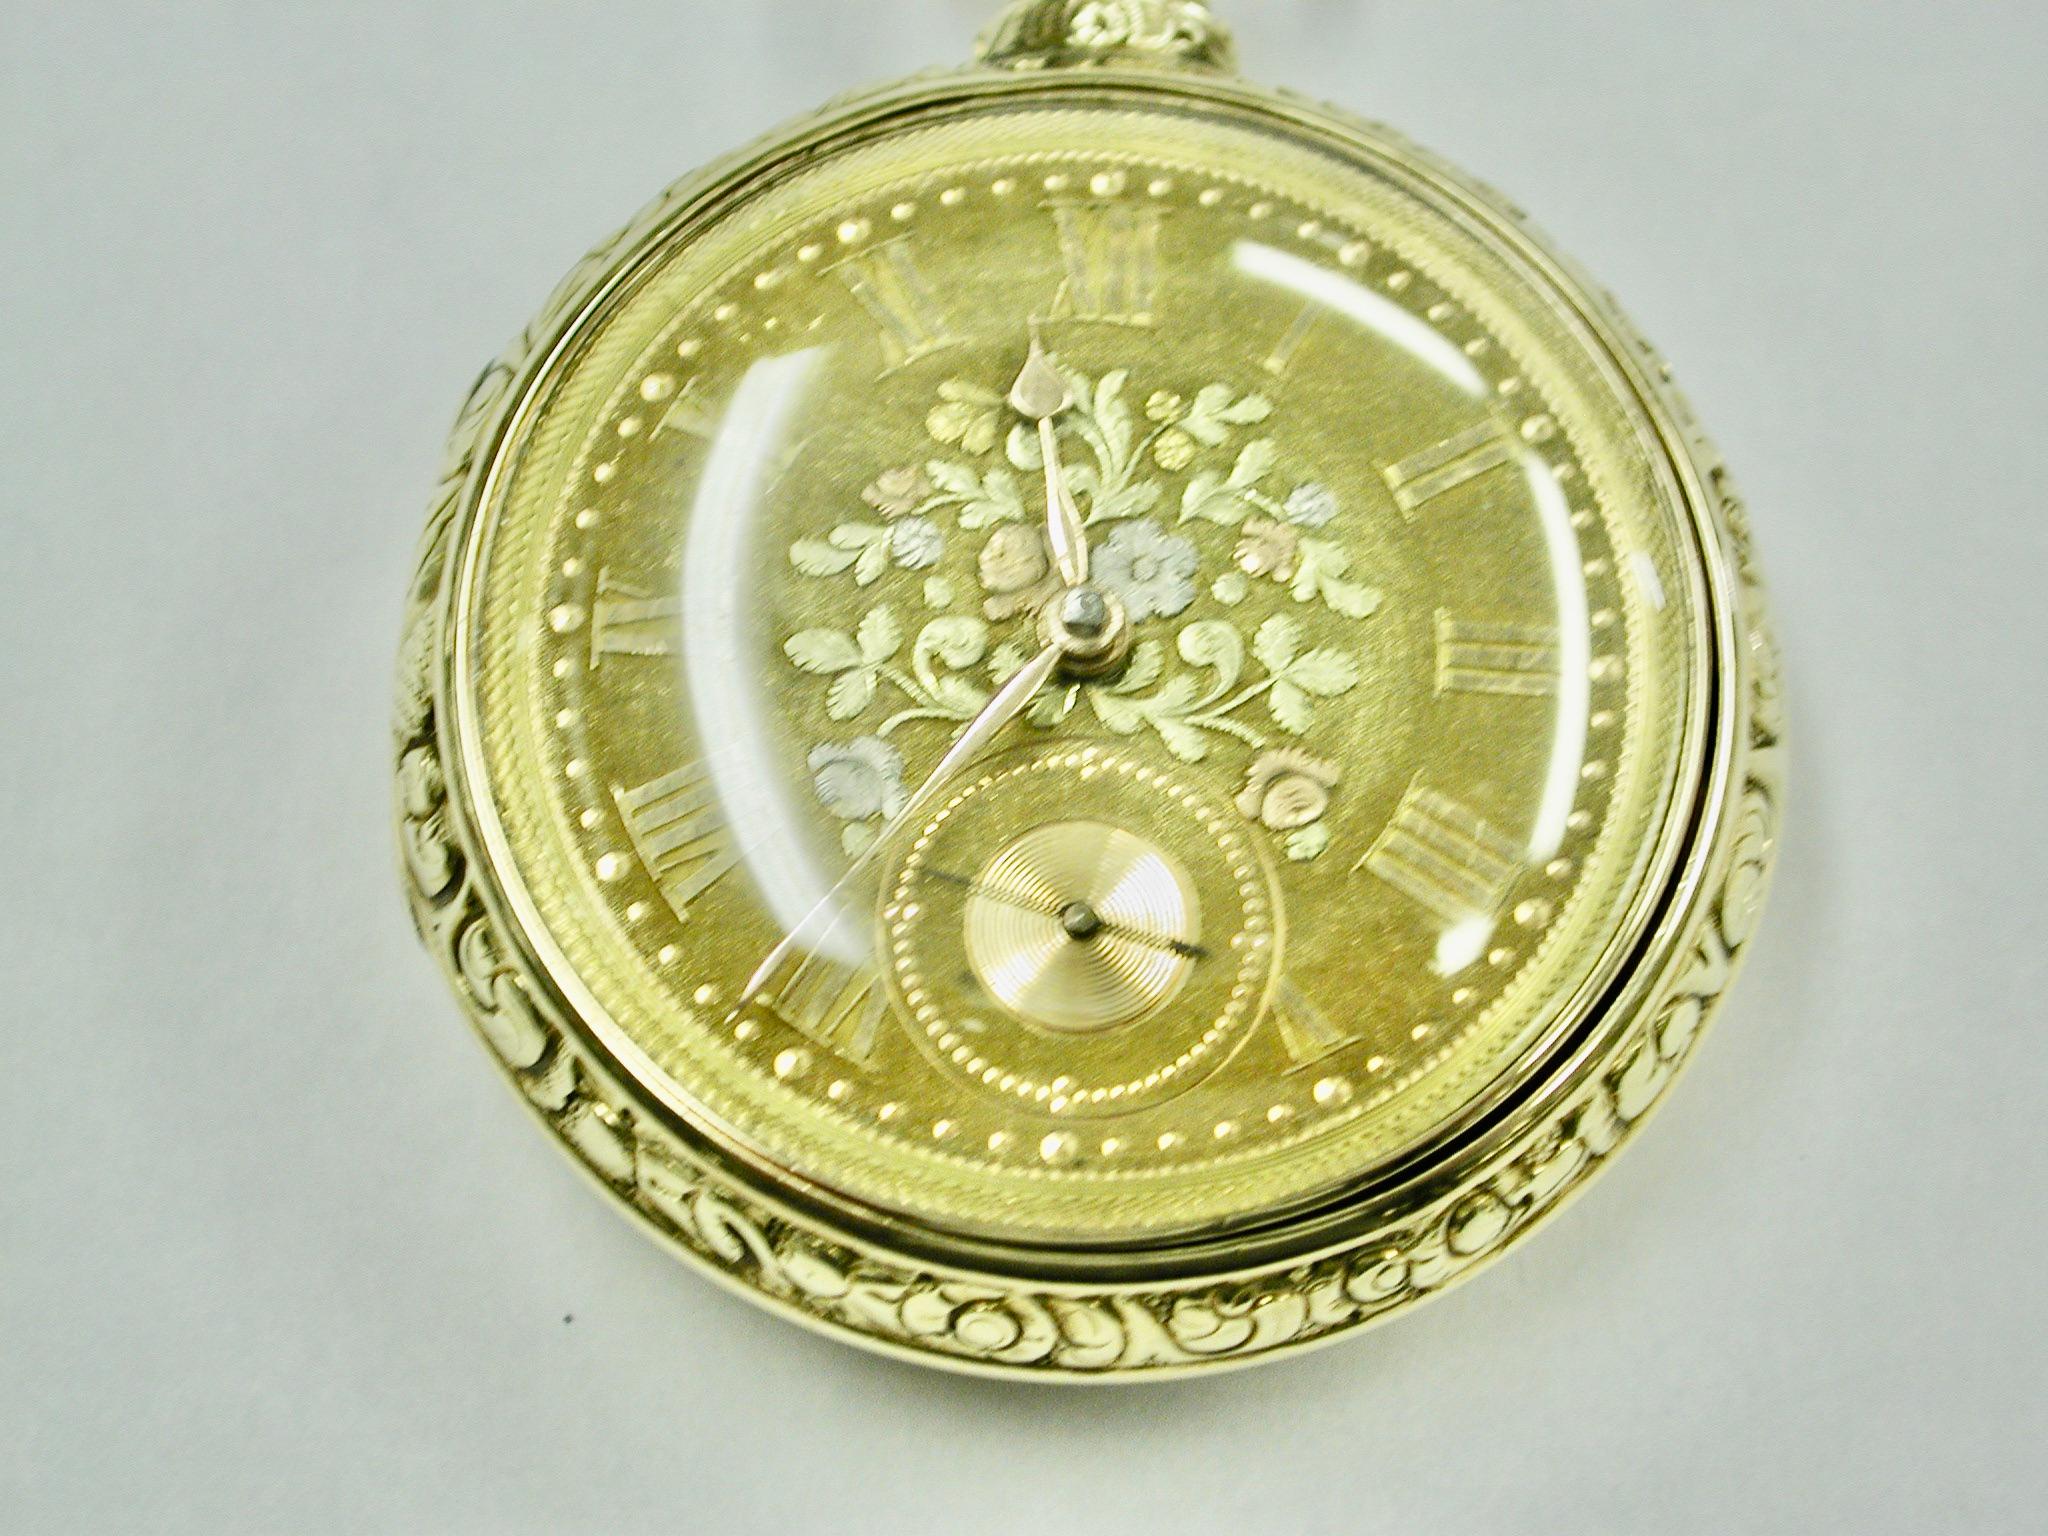 18ct Gold Pair-cased Pocket Watch With Tri-coloured Face Chester 1822
The case is made by Thomas Helsby of Liverpool 
 The movement is made by Thomas and John Ollivant of Manchester.
This watch is also a chronometer with a side black lever on the